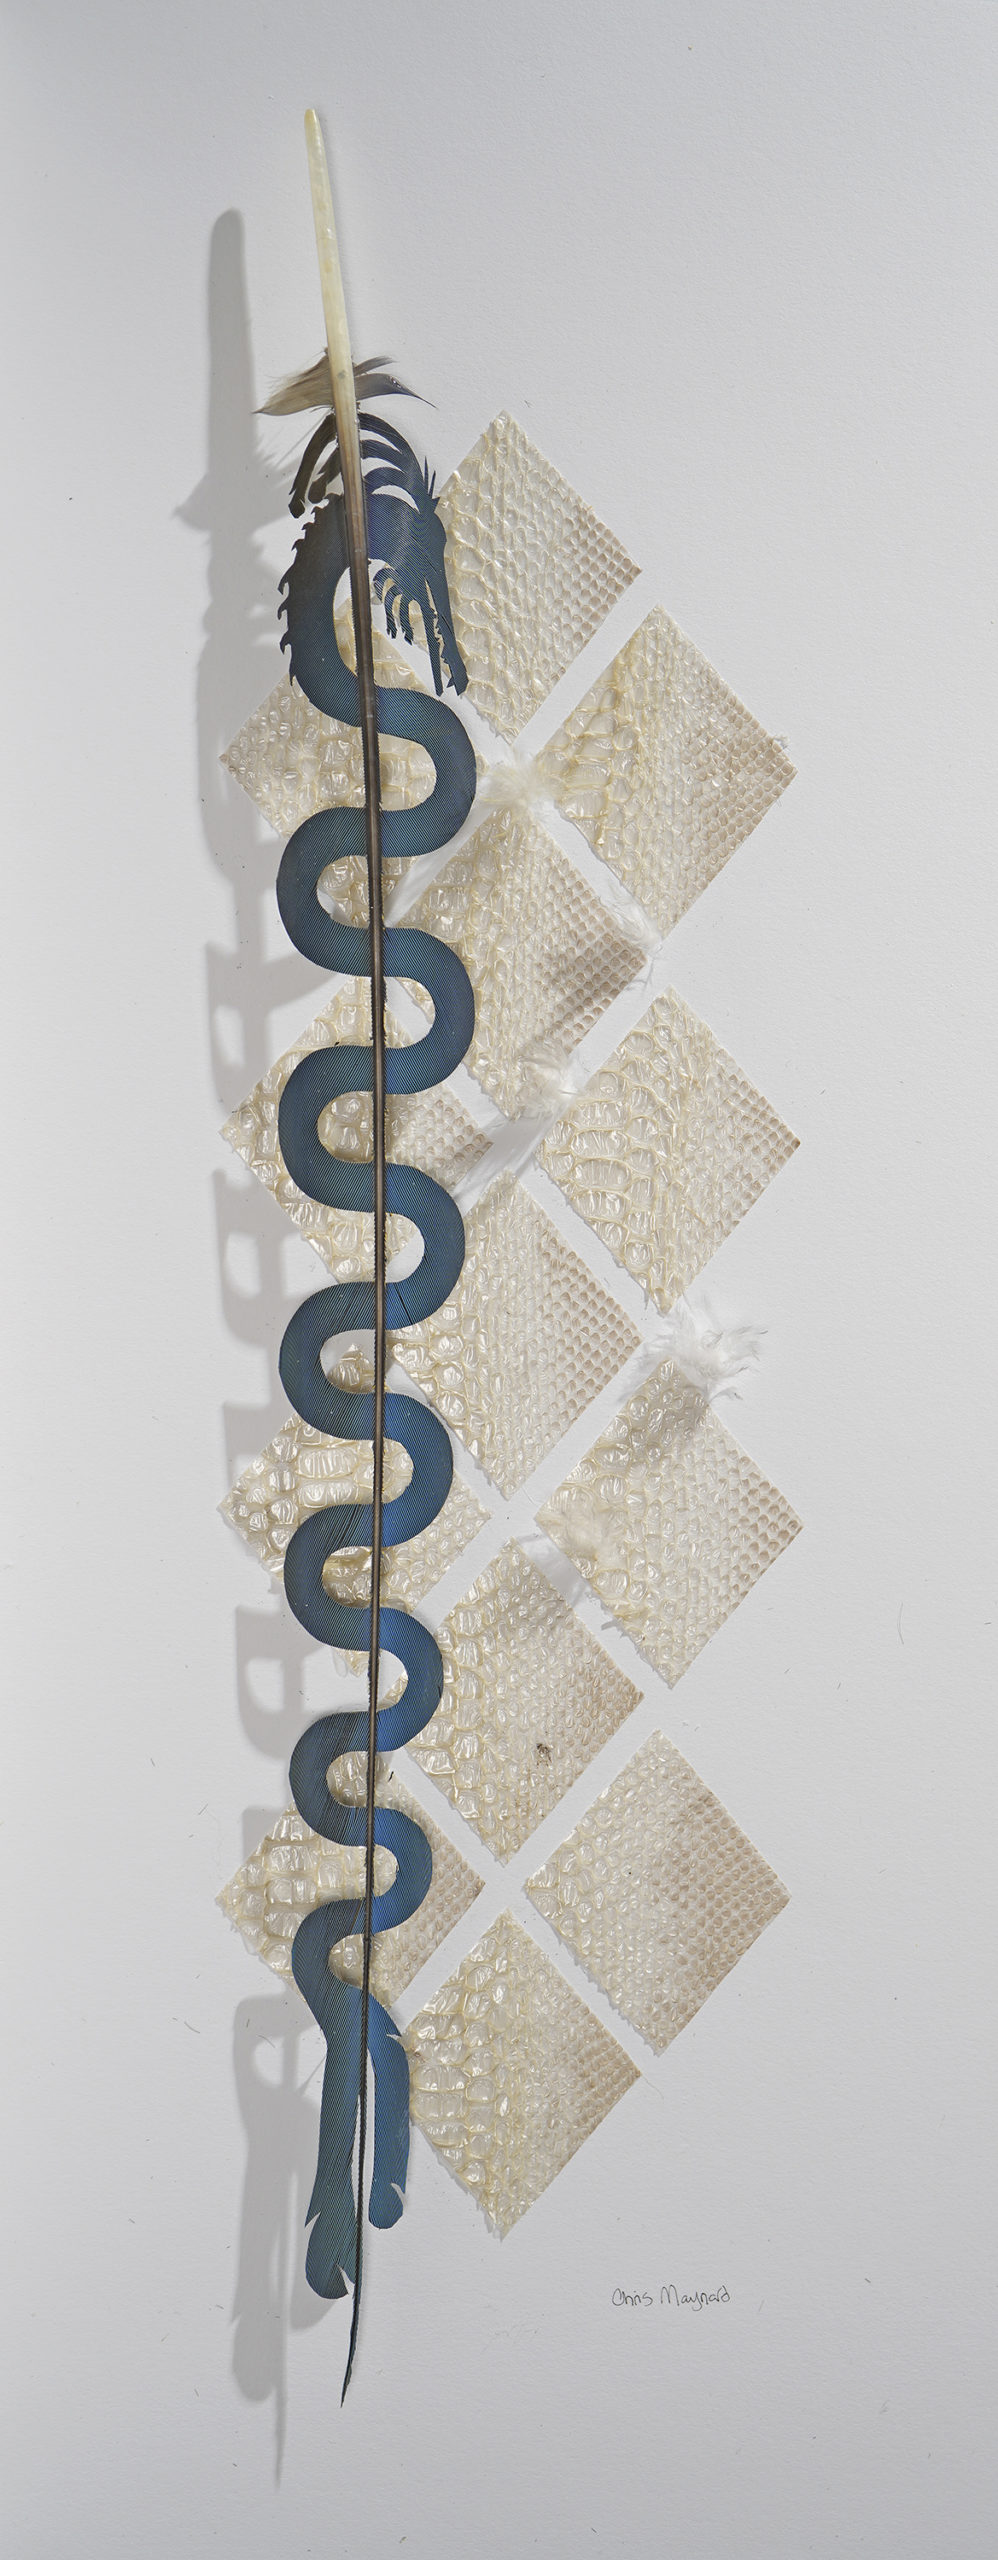 

											Chris Maynard</b>

											<em>
												Chris Maynard: New Works</em> 

											<h4>
												Currently on view through April 1, 2022											</h4>

		                																																<i>Plumed Serpent,</i>  
																																								2021, 
																																								rattlesnake skin and blue and gold macaw tail feathers, 
																																								23 x 9 inches 
																								
		                				